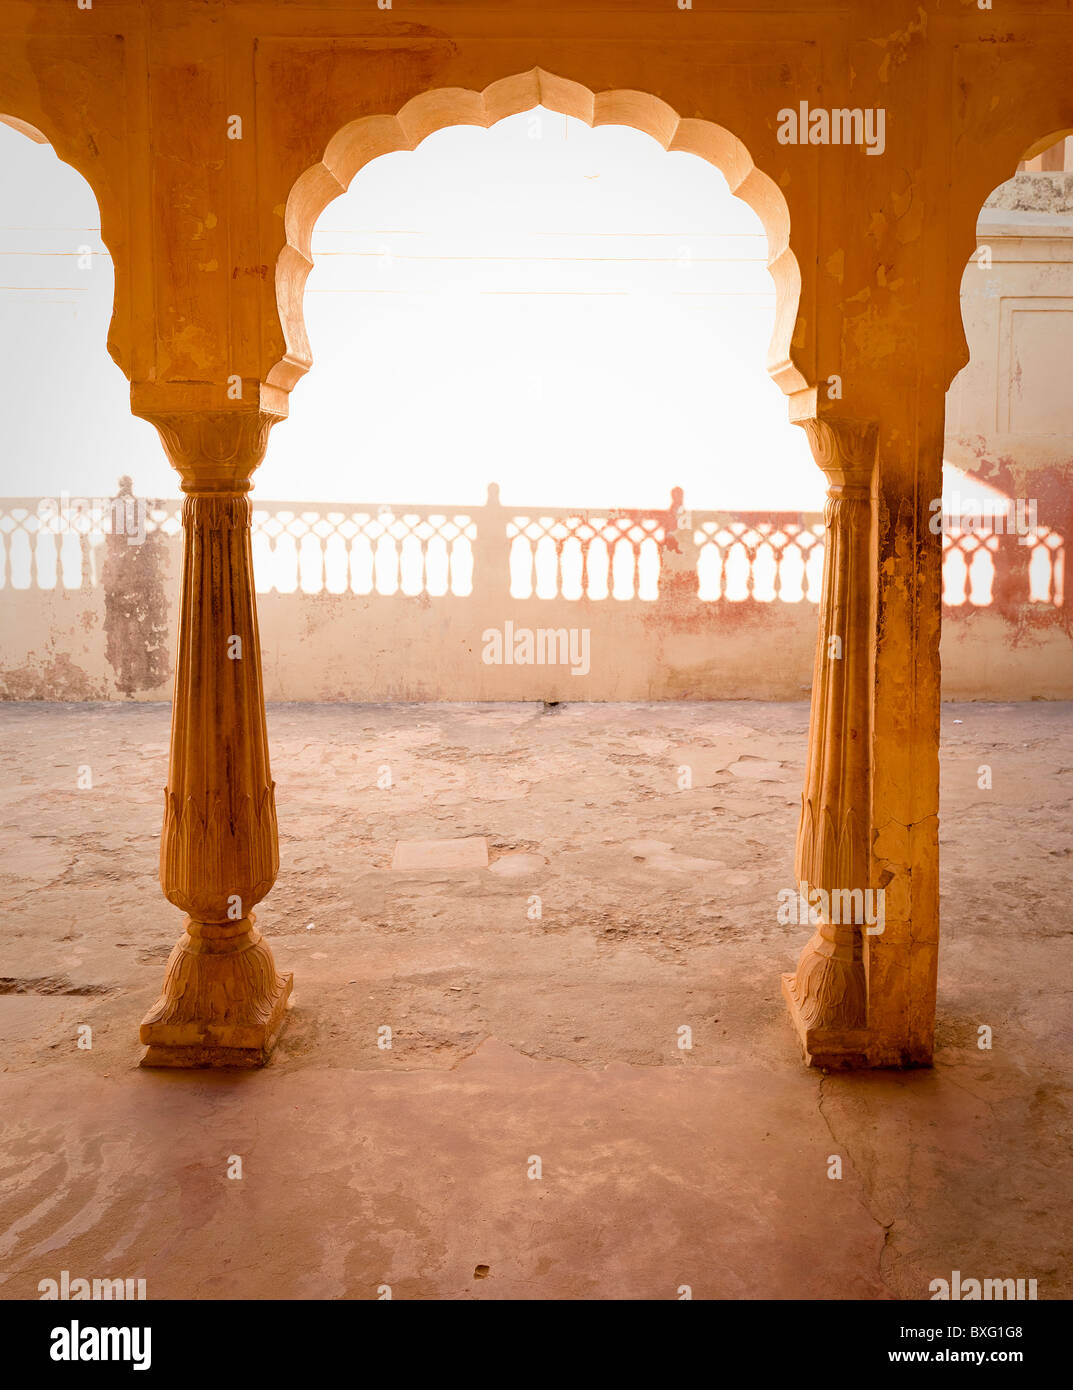 Ornate Indian arch and courtyard Stock Photo